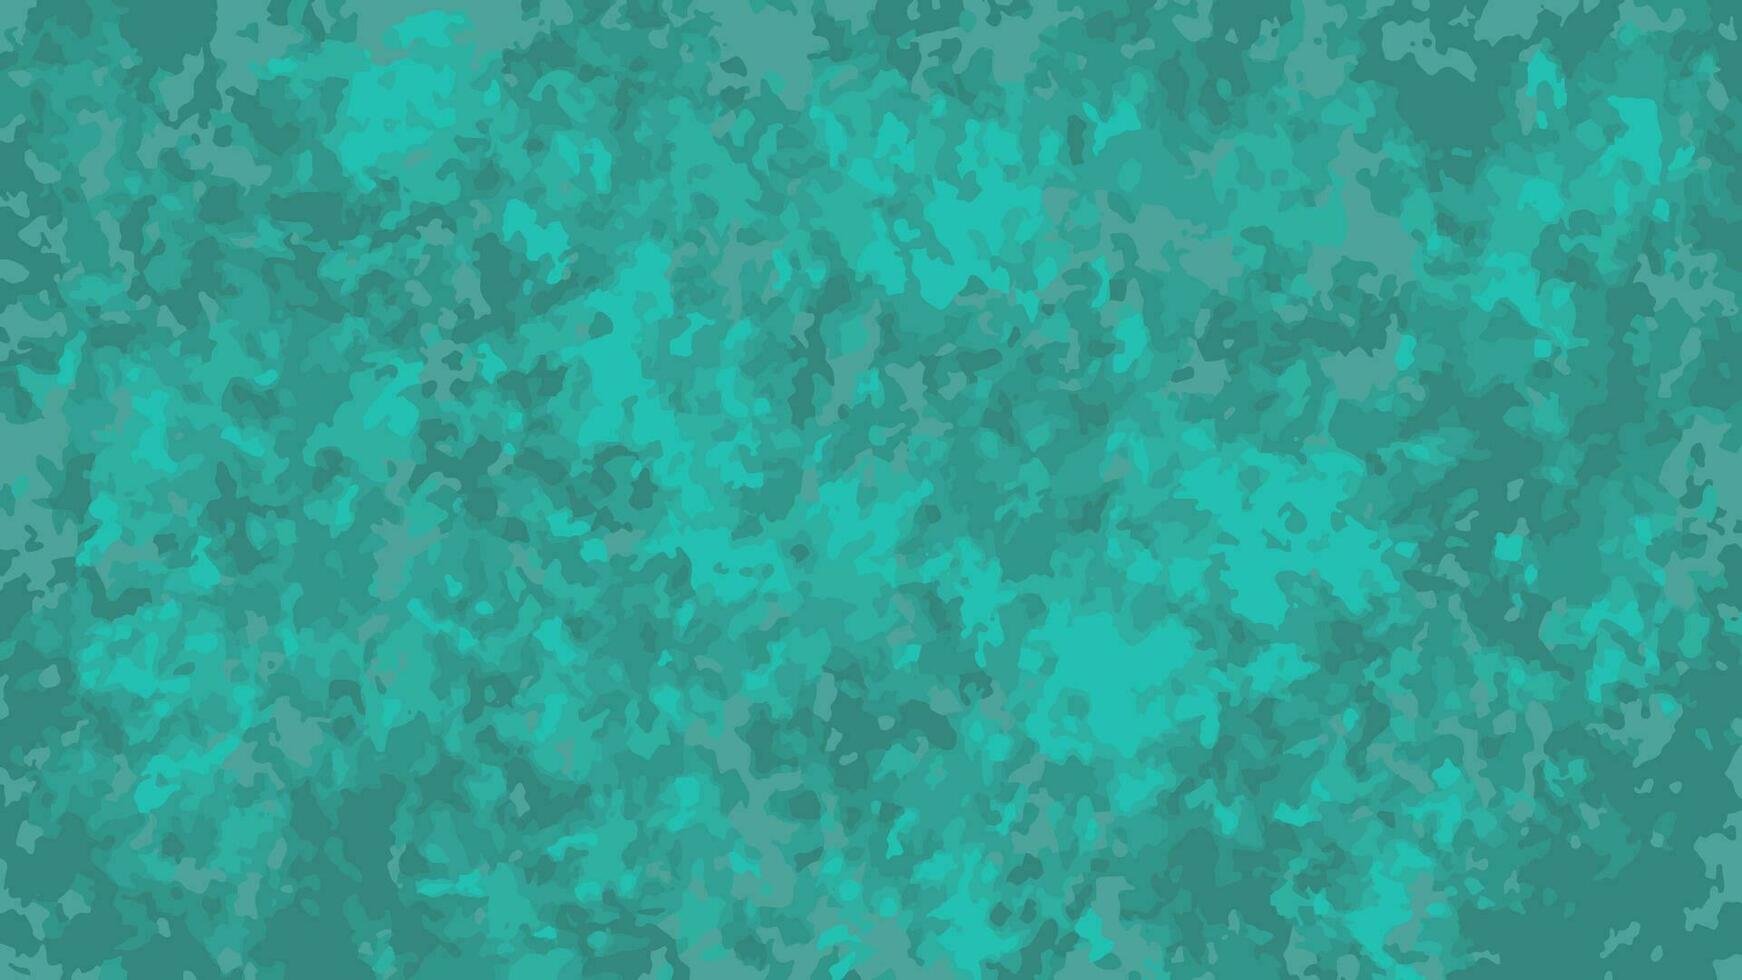 Abstract background in shades of green and emerald. Camouflage color. Vibrant and colorful small spots. Print for clothing, textile, backdrop, notebook cover, printed matter design. Vector